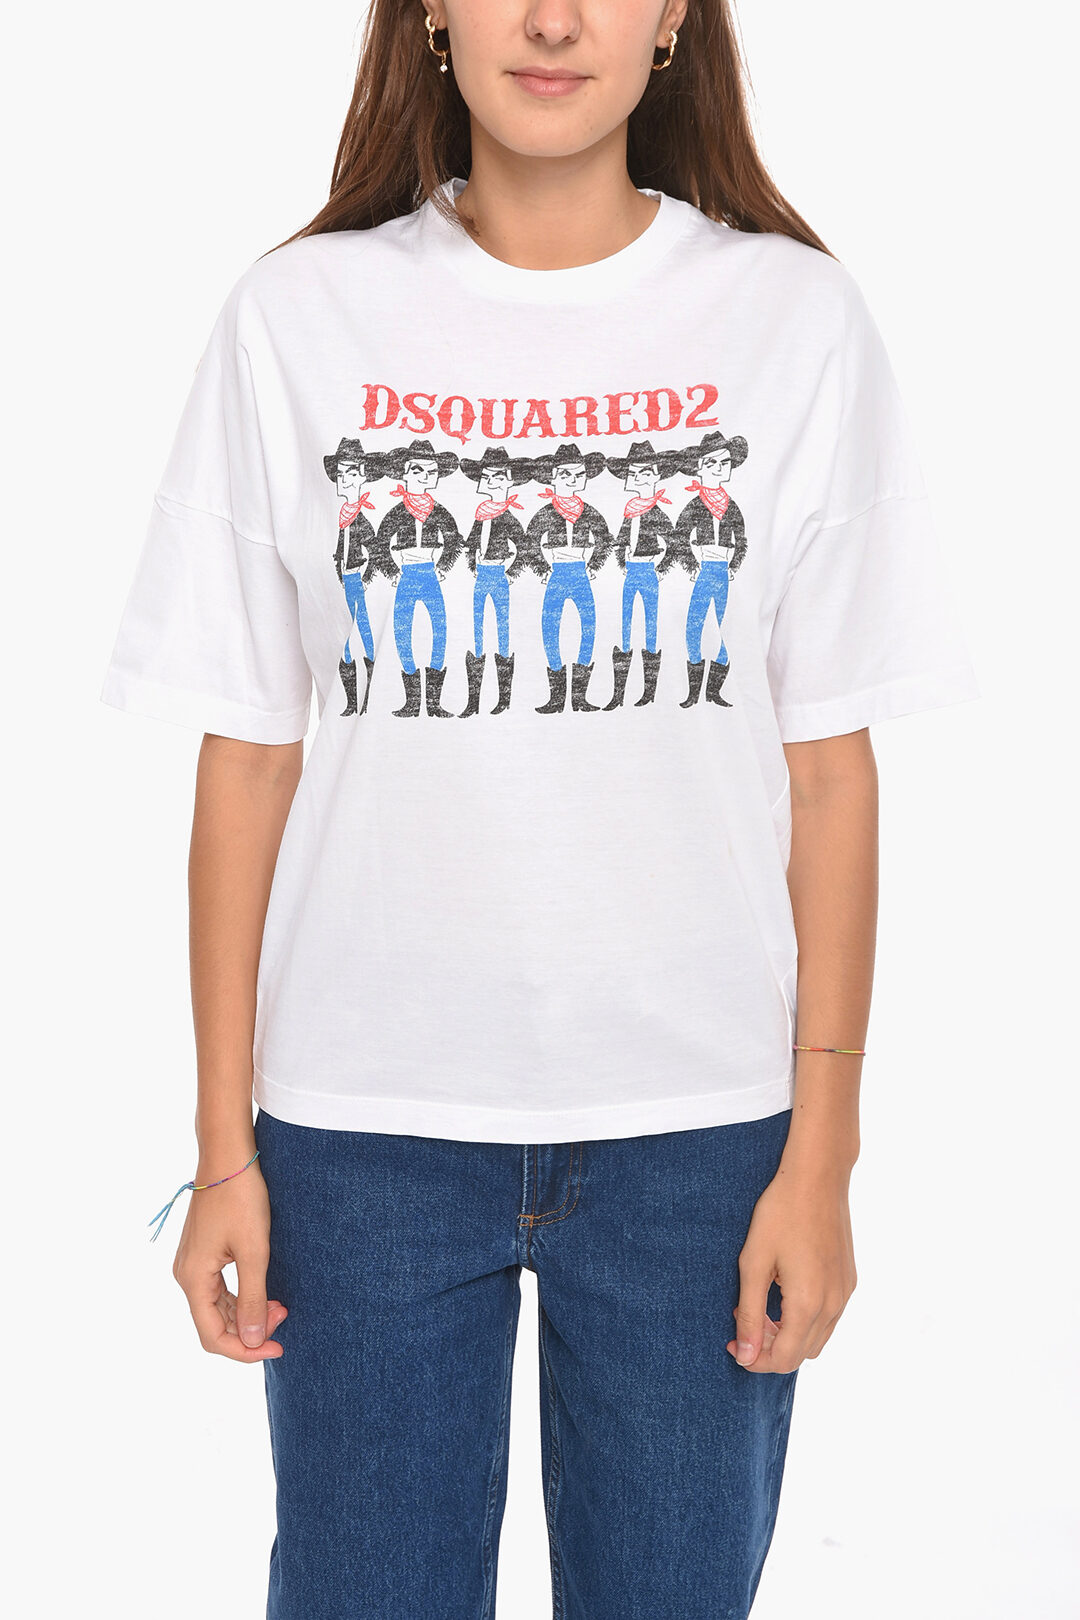 Dsquared2 Printed T-shirt with Cowboy Motif women - Glamood Outlet